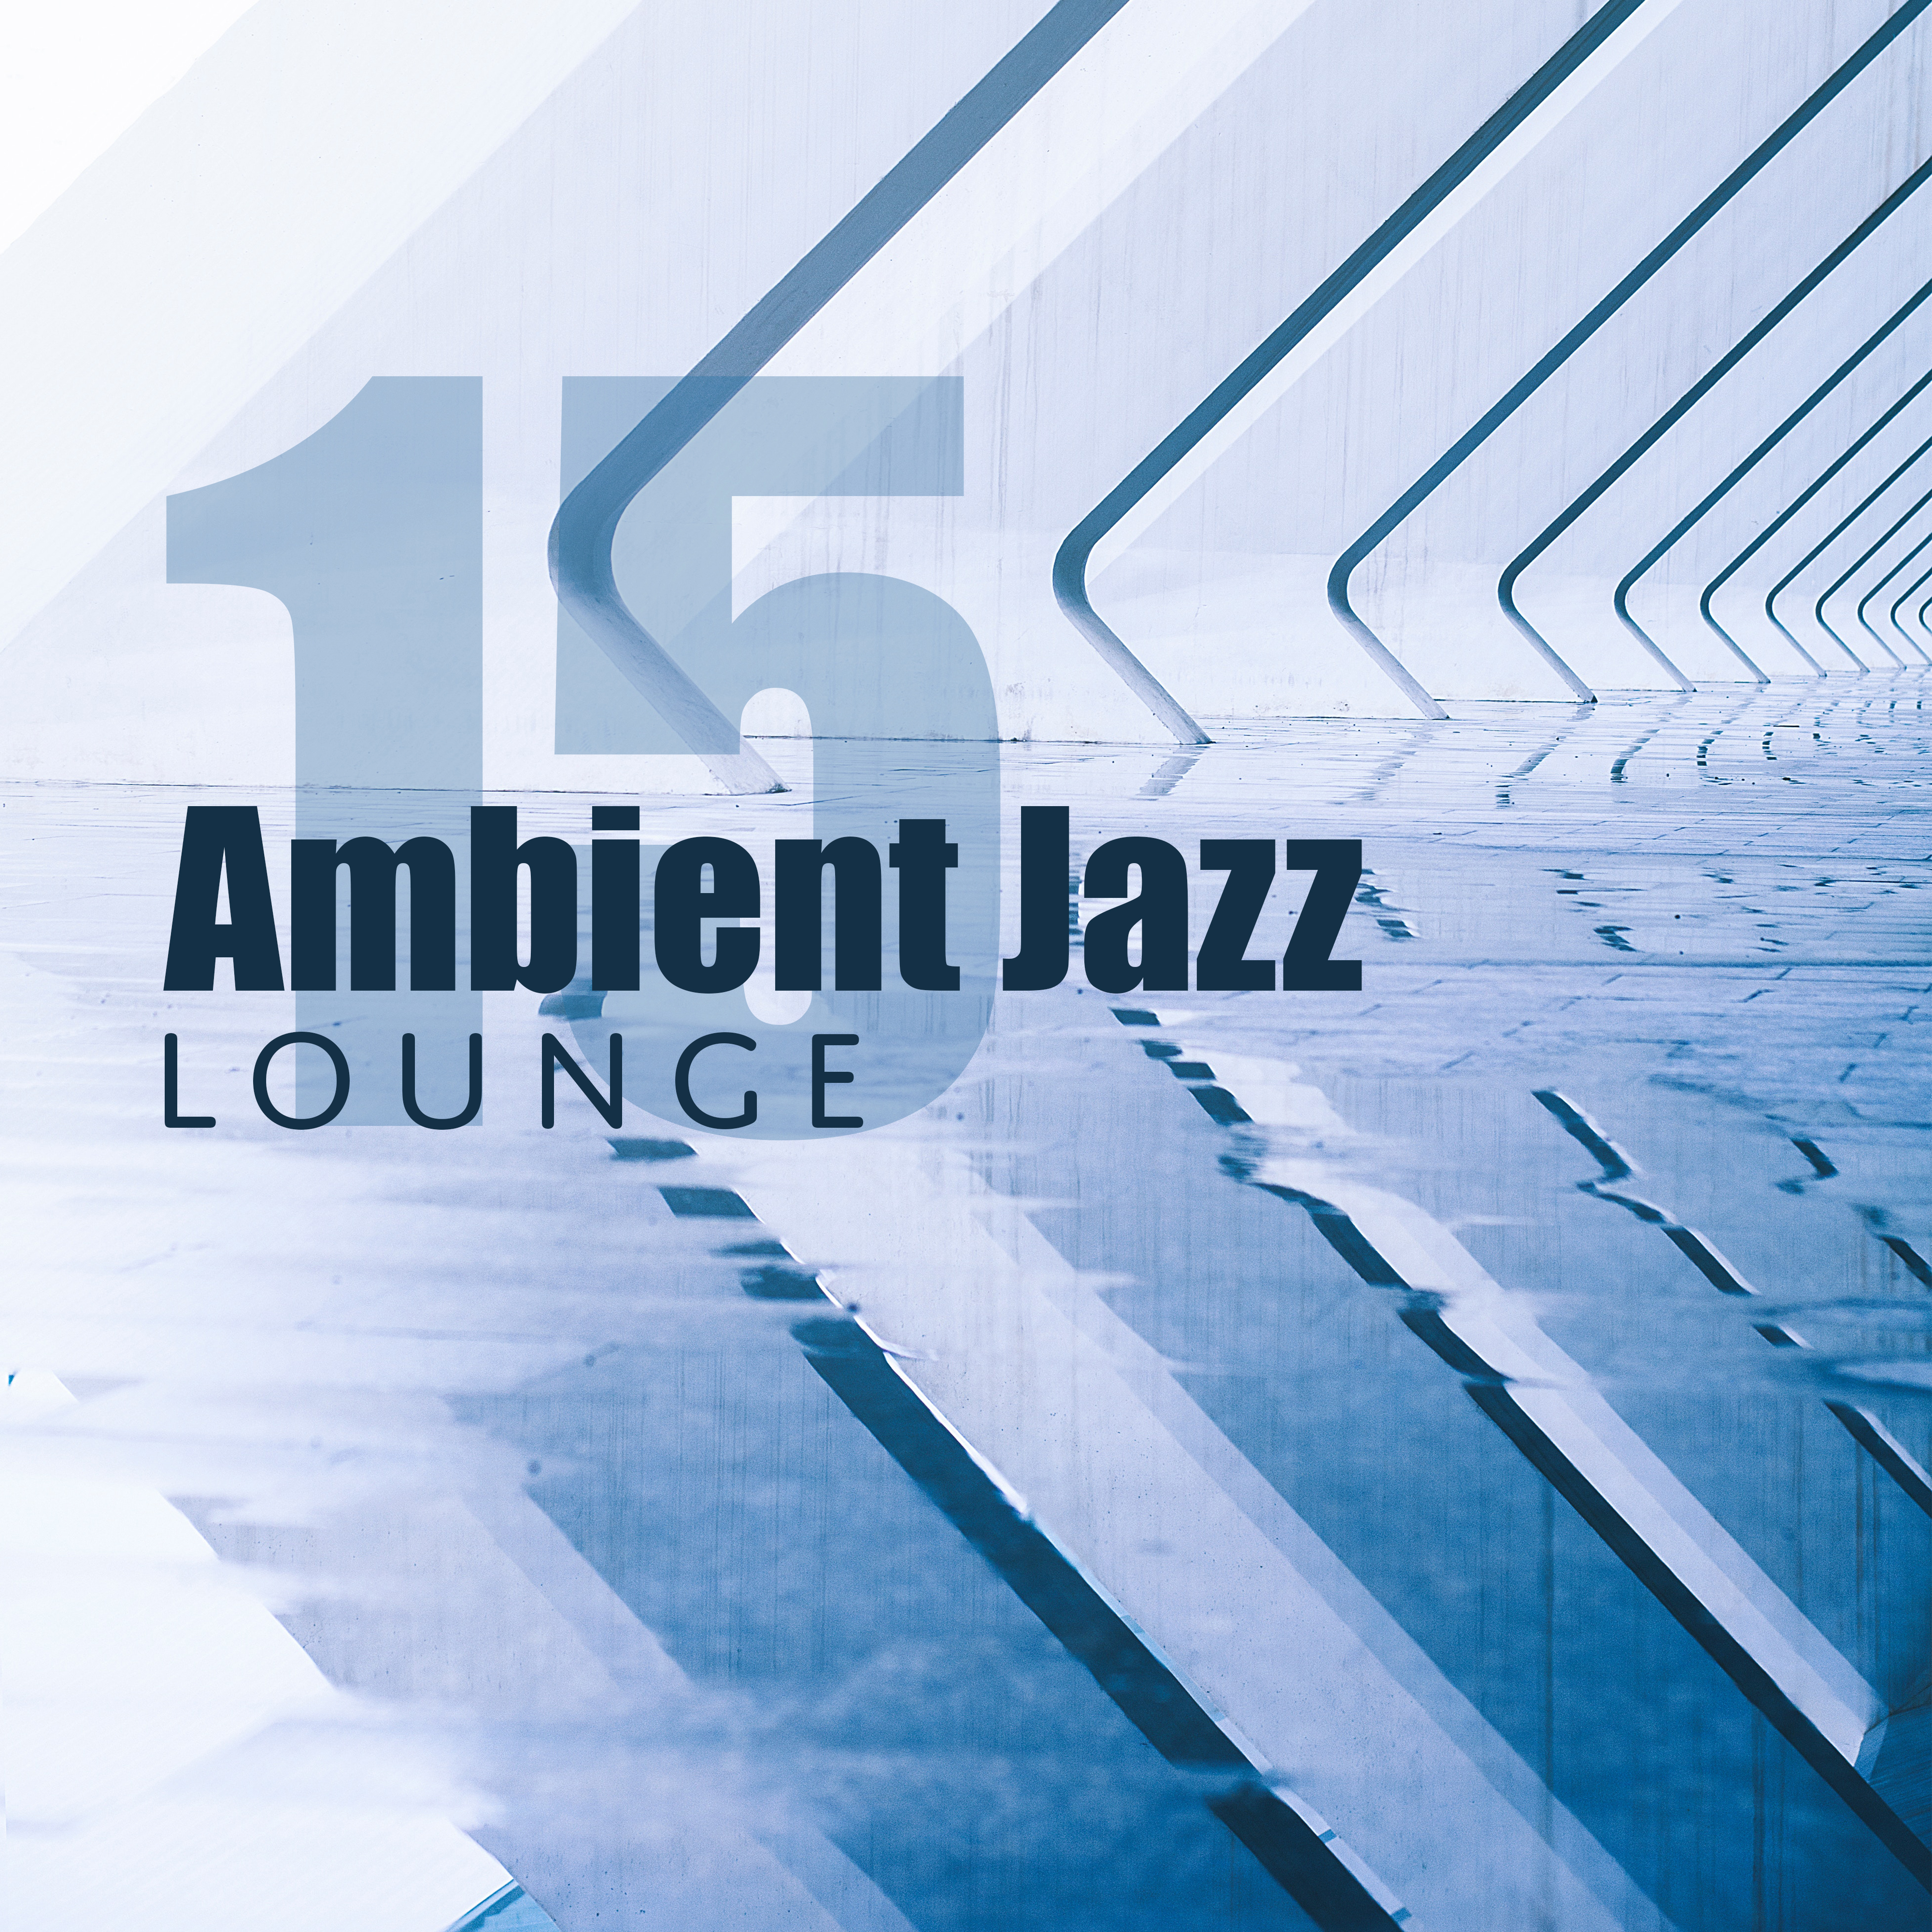 15 Ambient Jazz Lounge